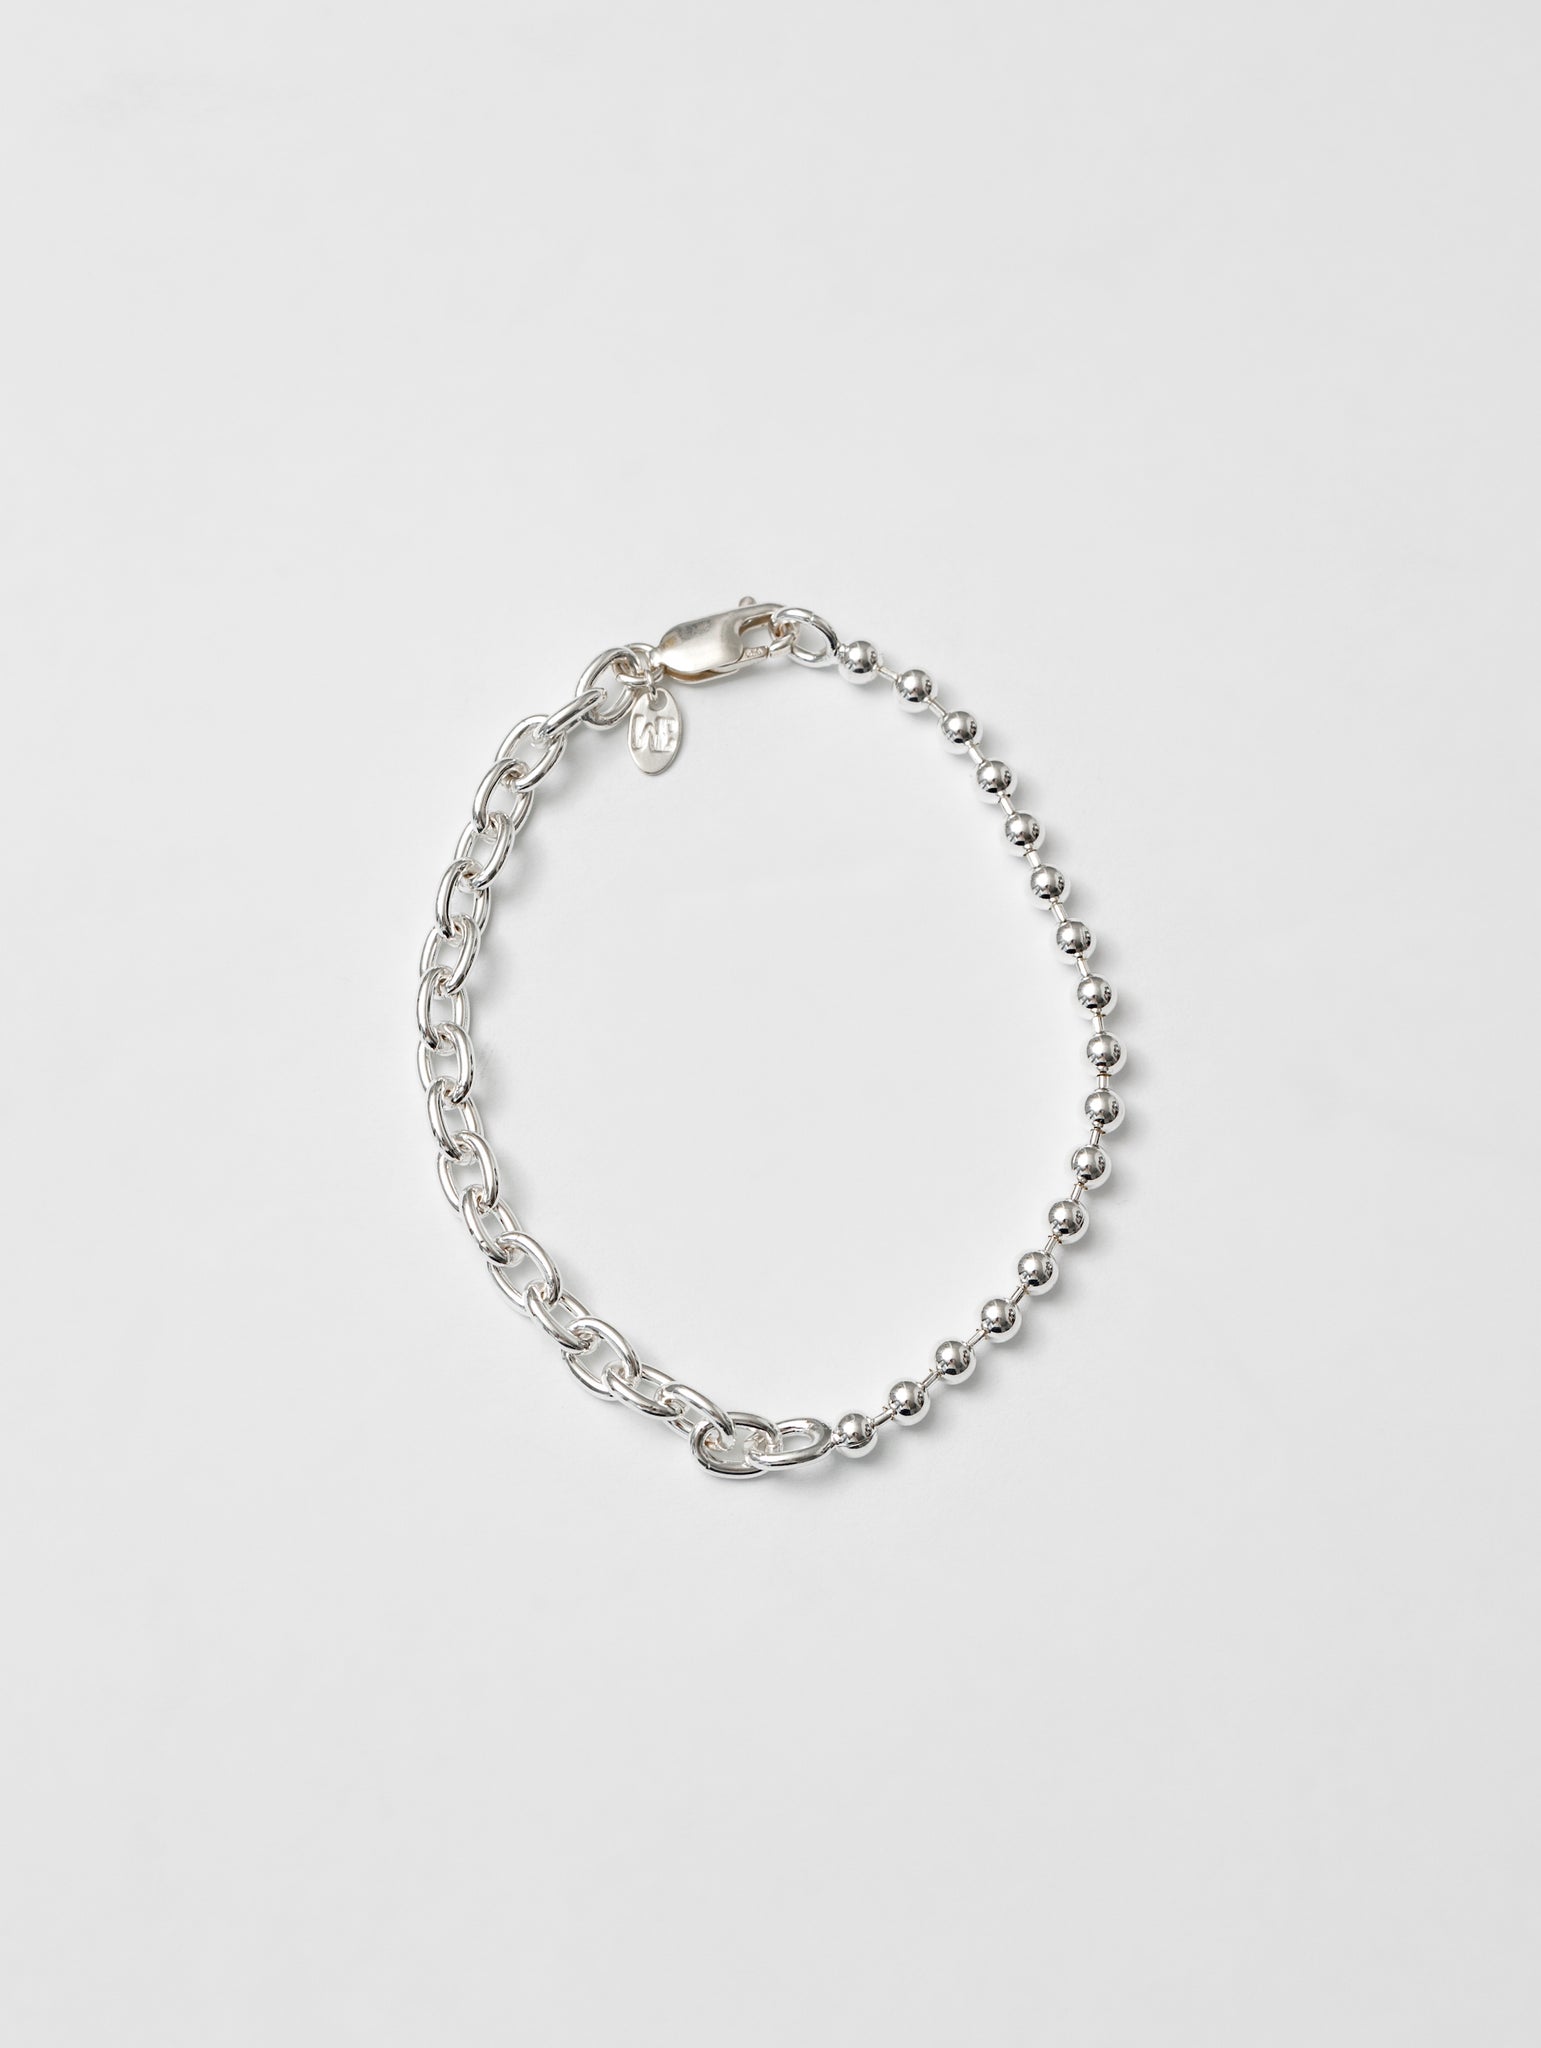 Wolf Circus Statement Unisex Combination Ball Oval Chain Link 925 Sterling Silver Bracelet | Noah Bracelet in Sterling Silver-Bracelets-wolfcircus.com